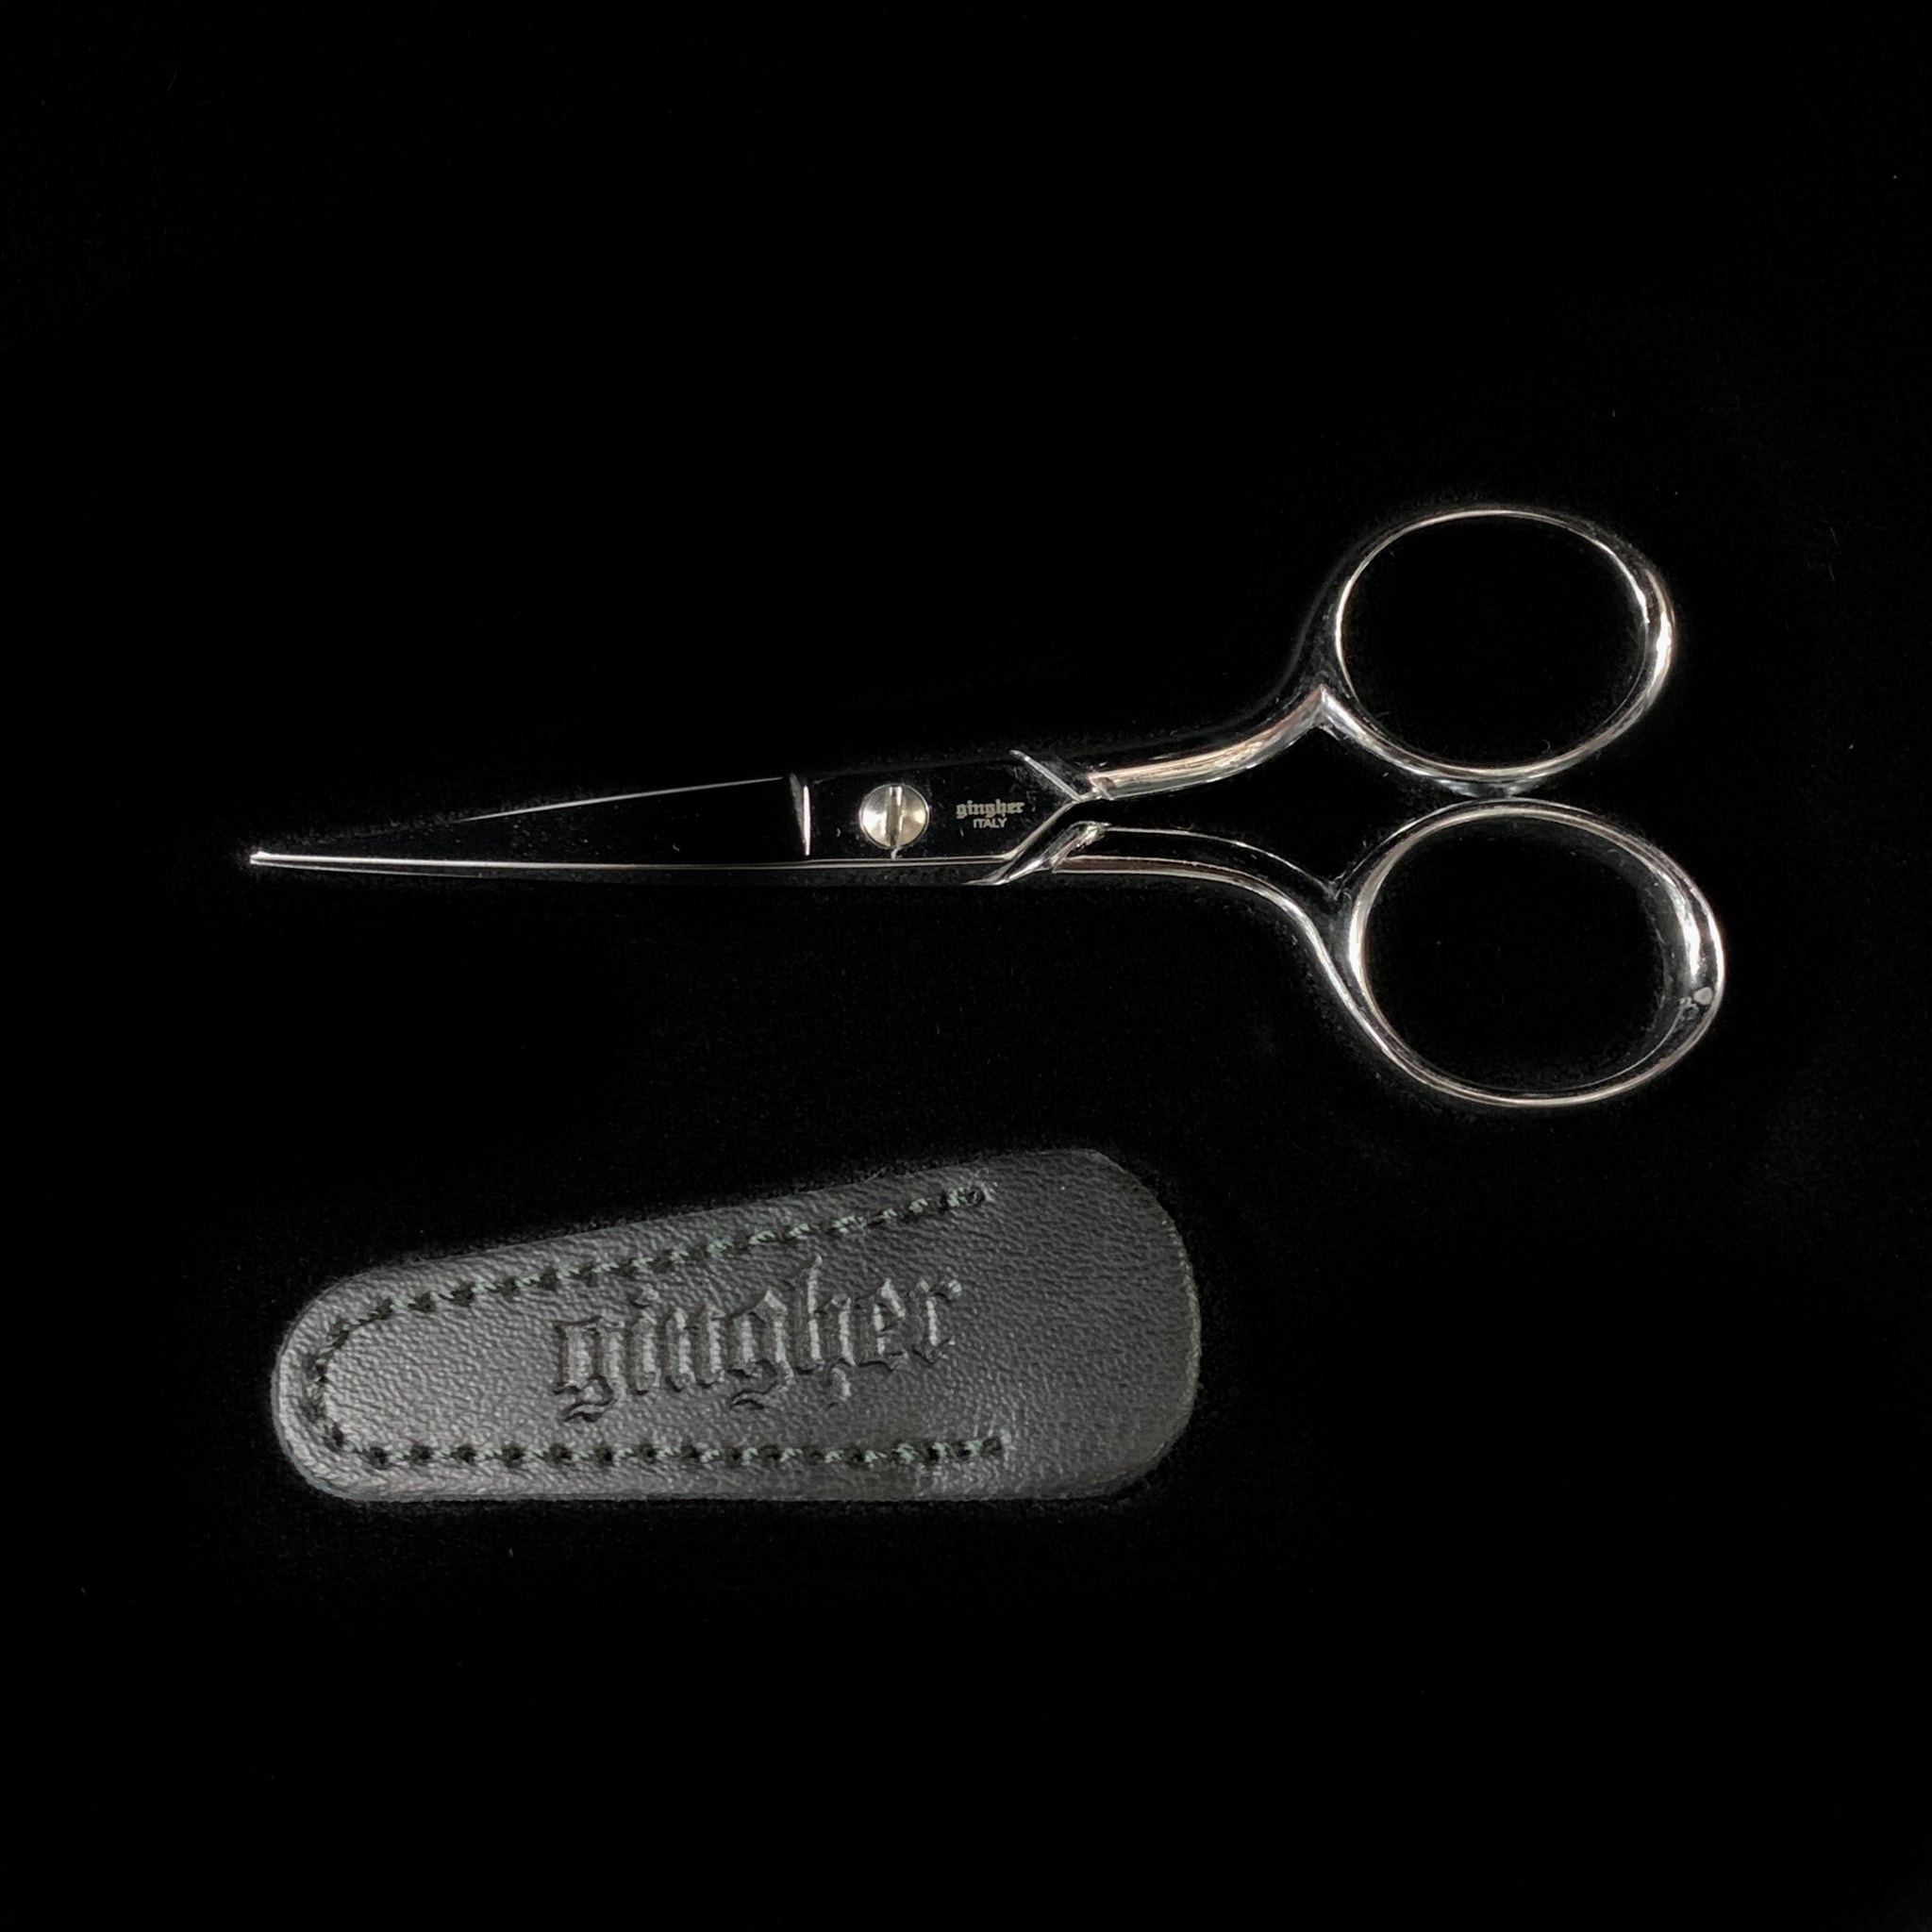 Gingher 4 Classic Embroidery Scissors – Panda Int'l Trading of NY, Inc